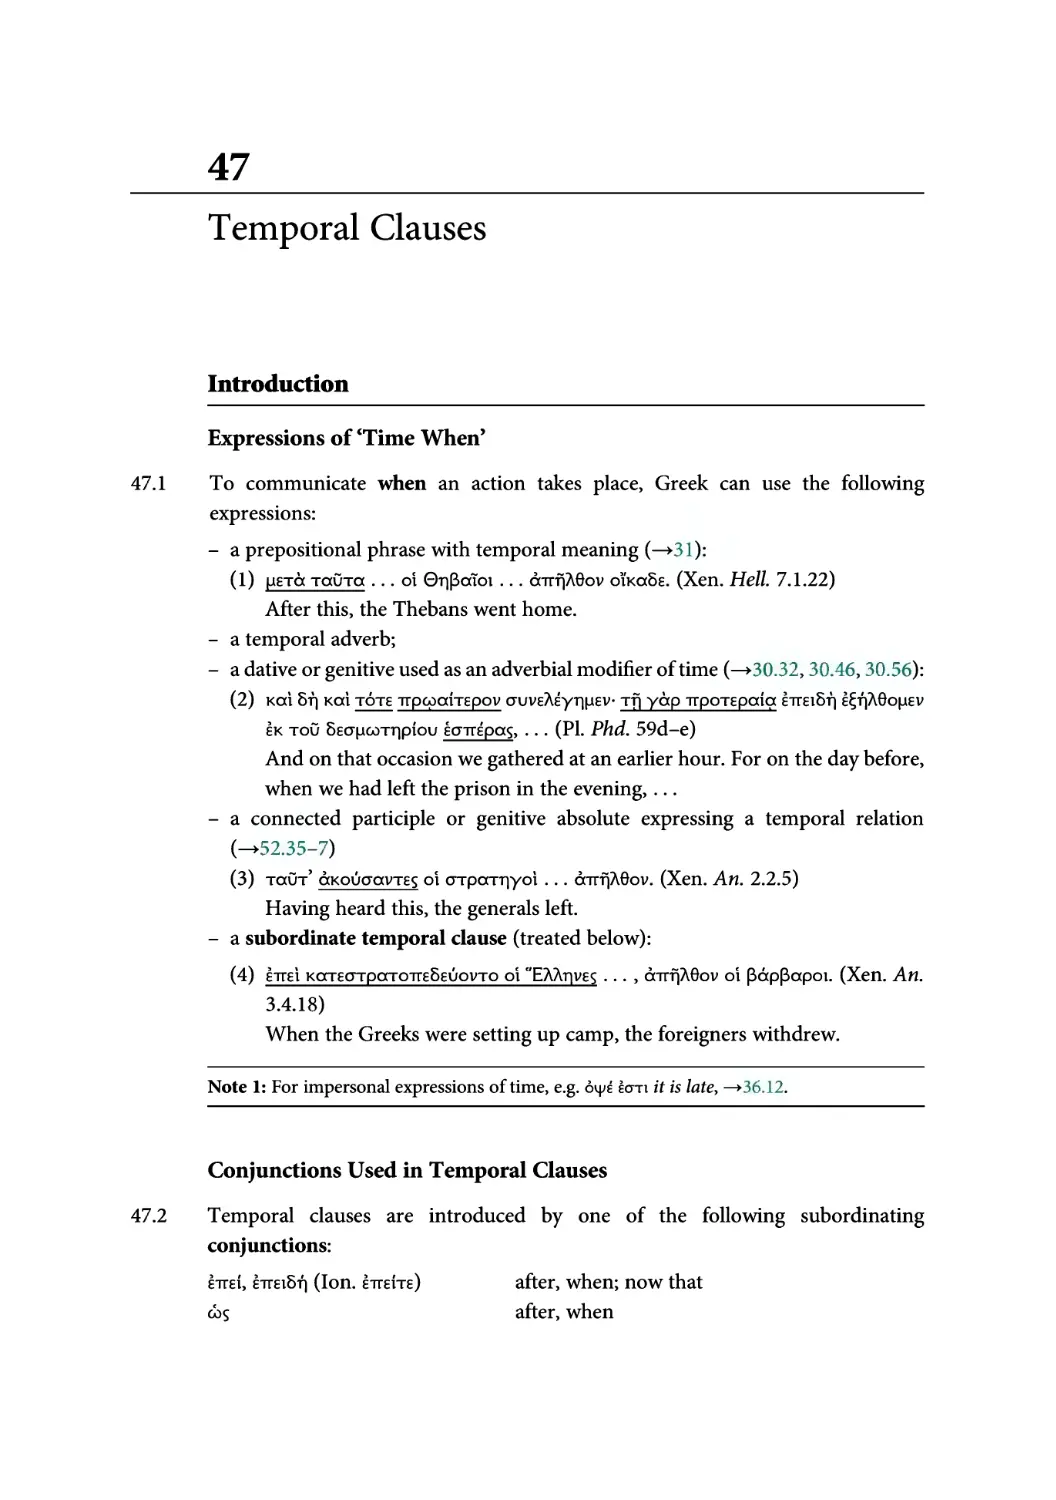 47. Temporal Clauses